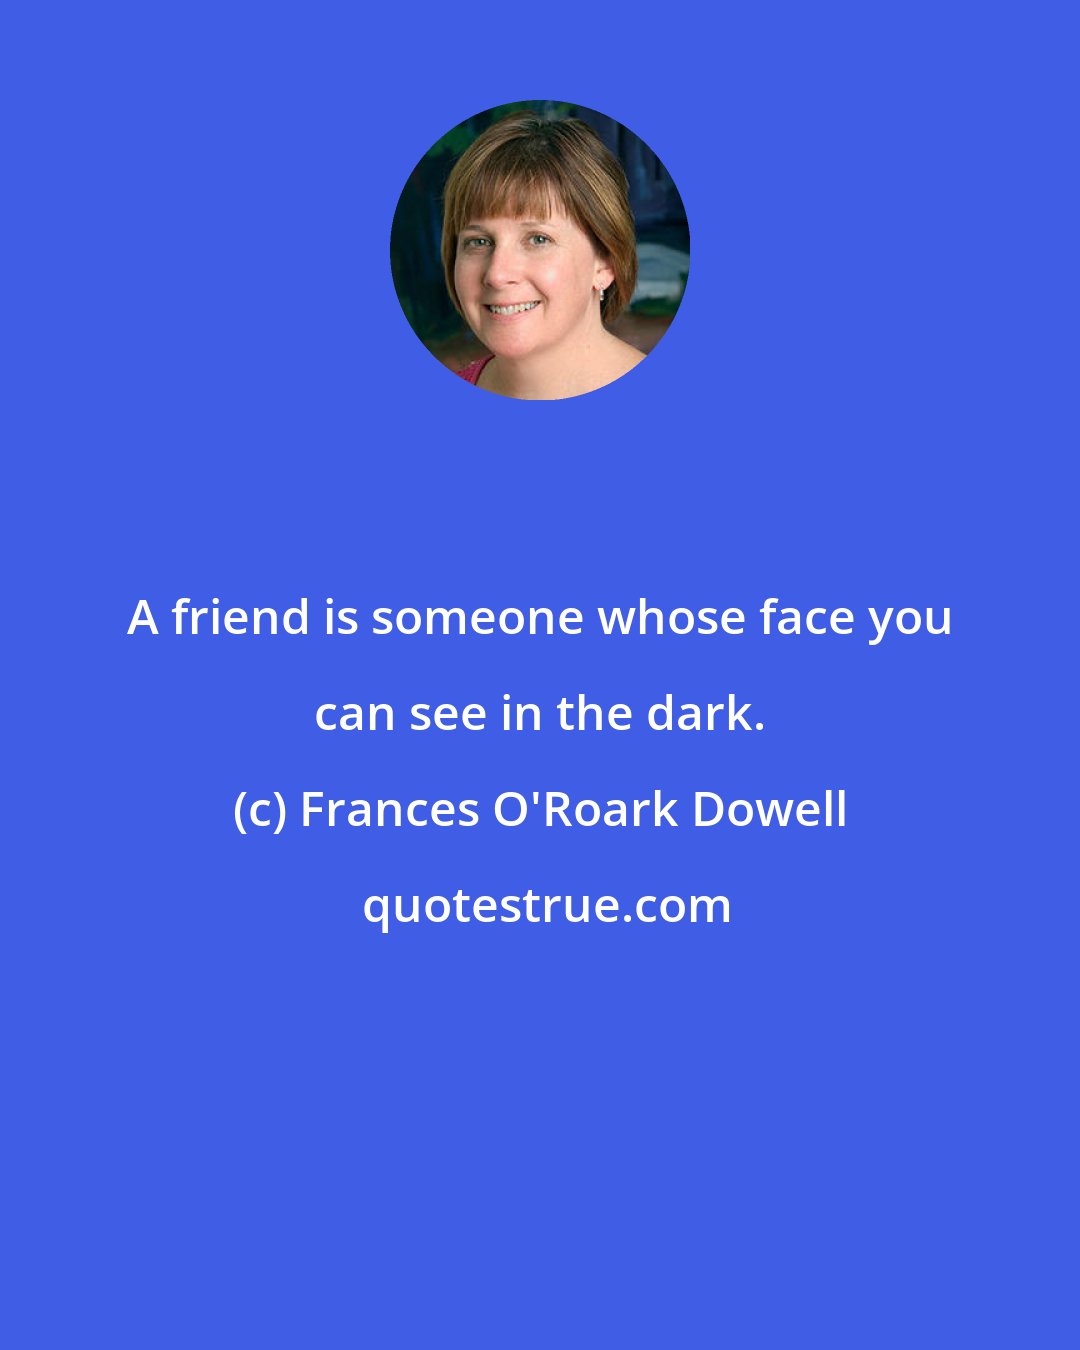 Frances O'Roark Dowell: A friend is someone whose face you can see in the dark.